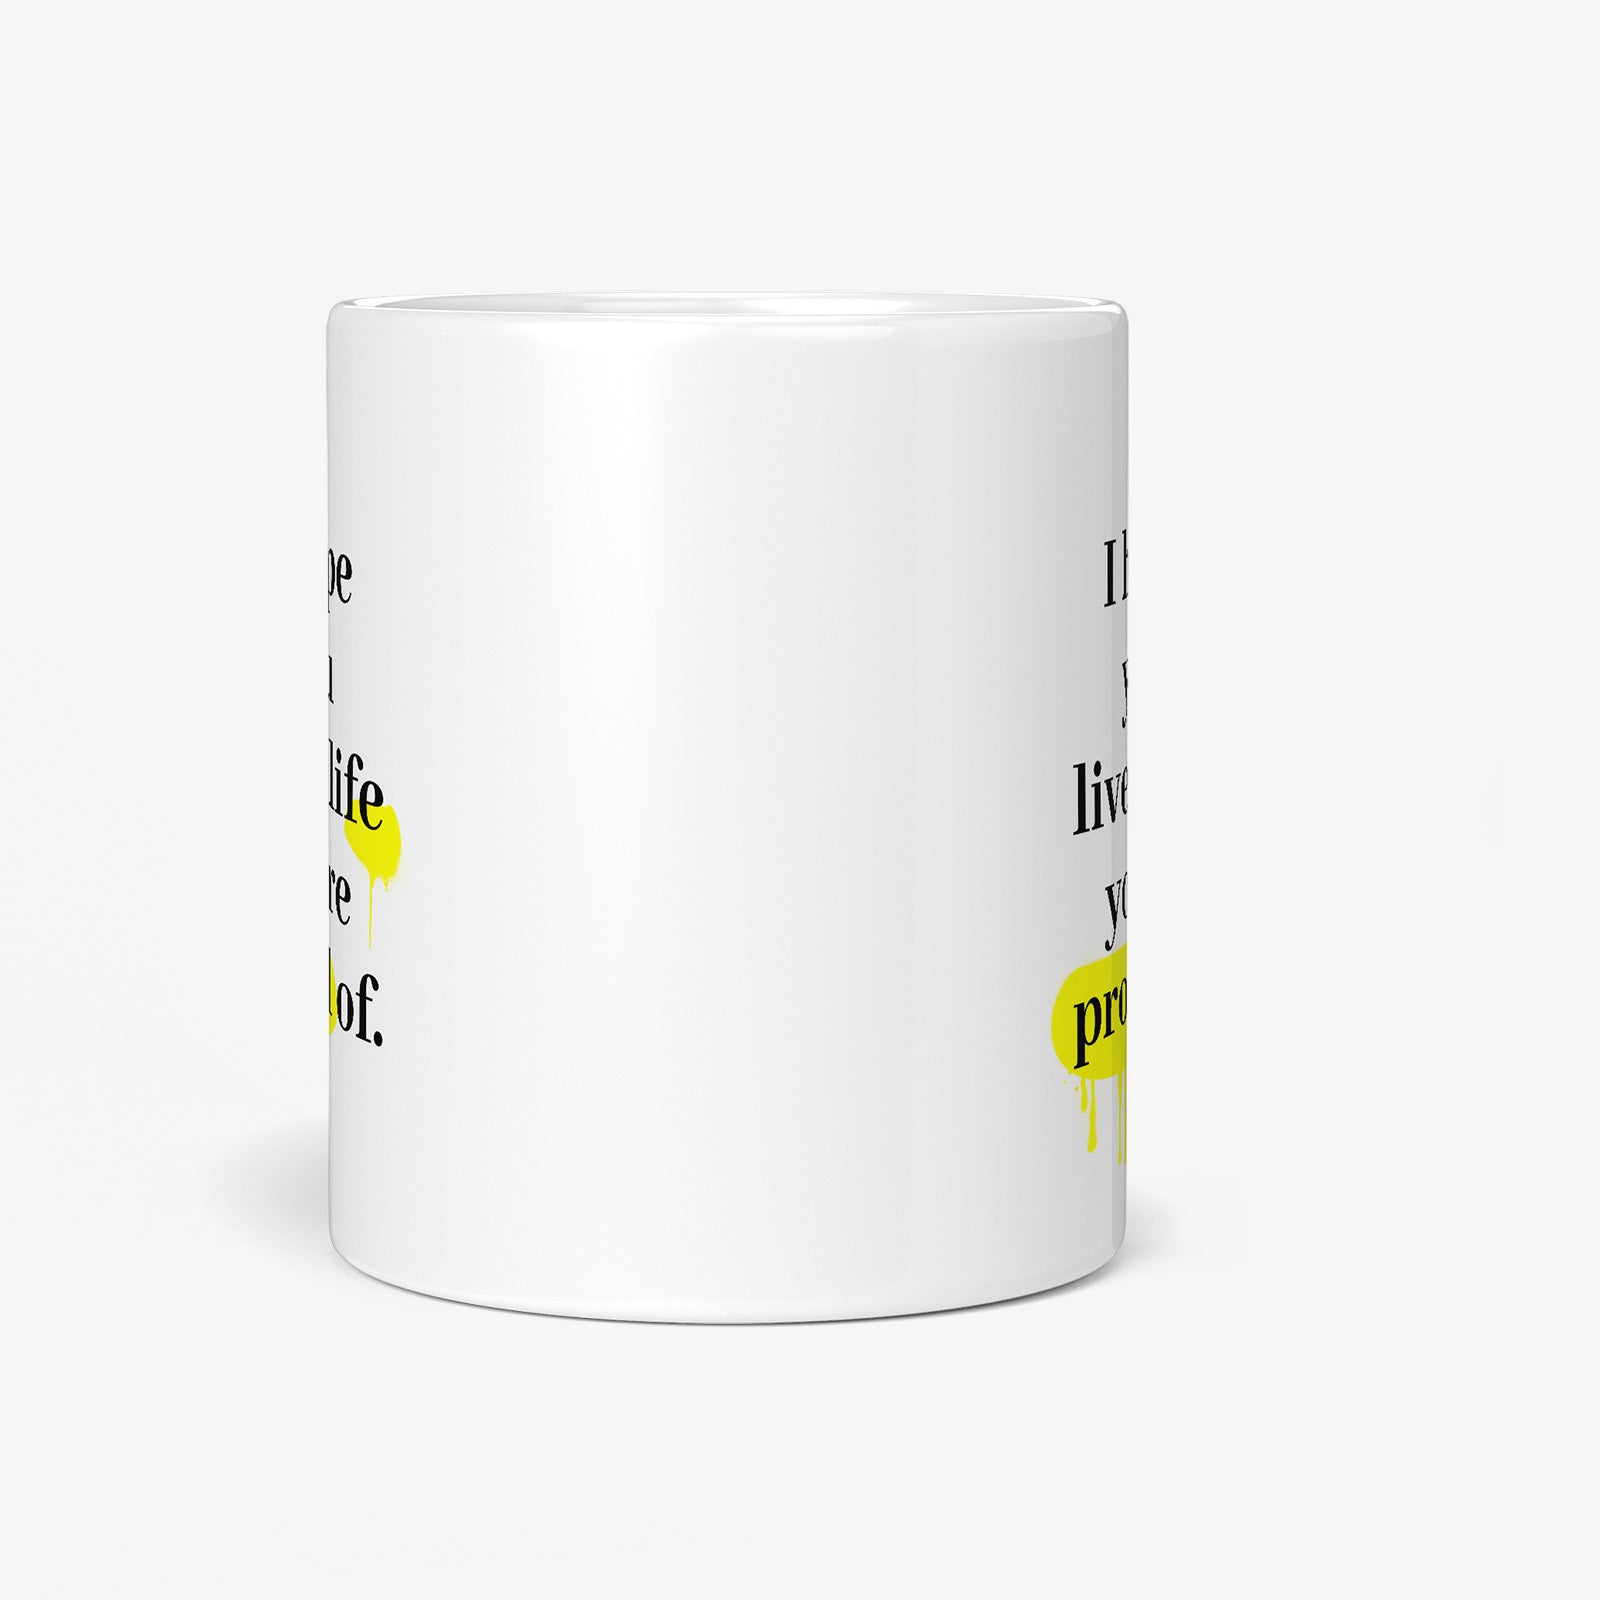 Be inspired by F. Scott Fitzgerald's famous quote, "I hope you live a life you're proud of" on this white and glossy 11oz coffee mug with a front view.